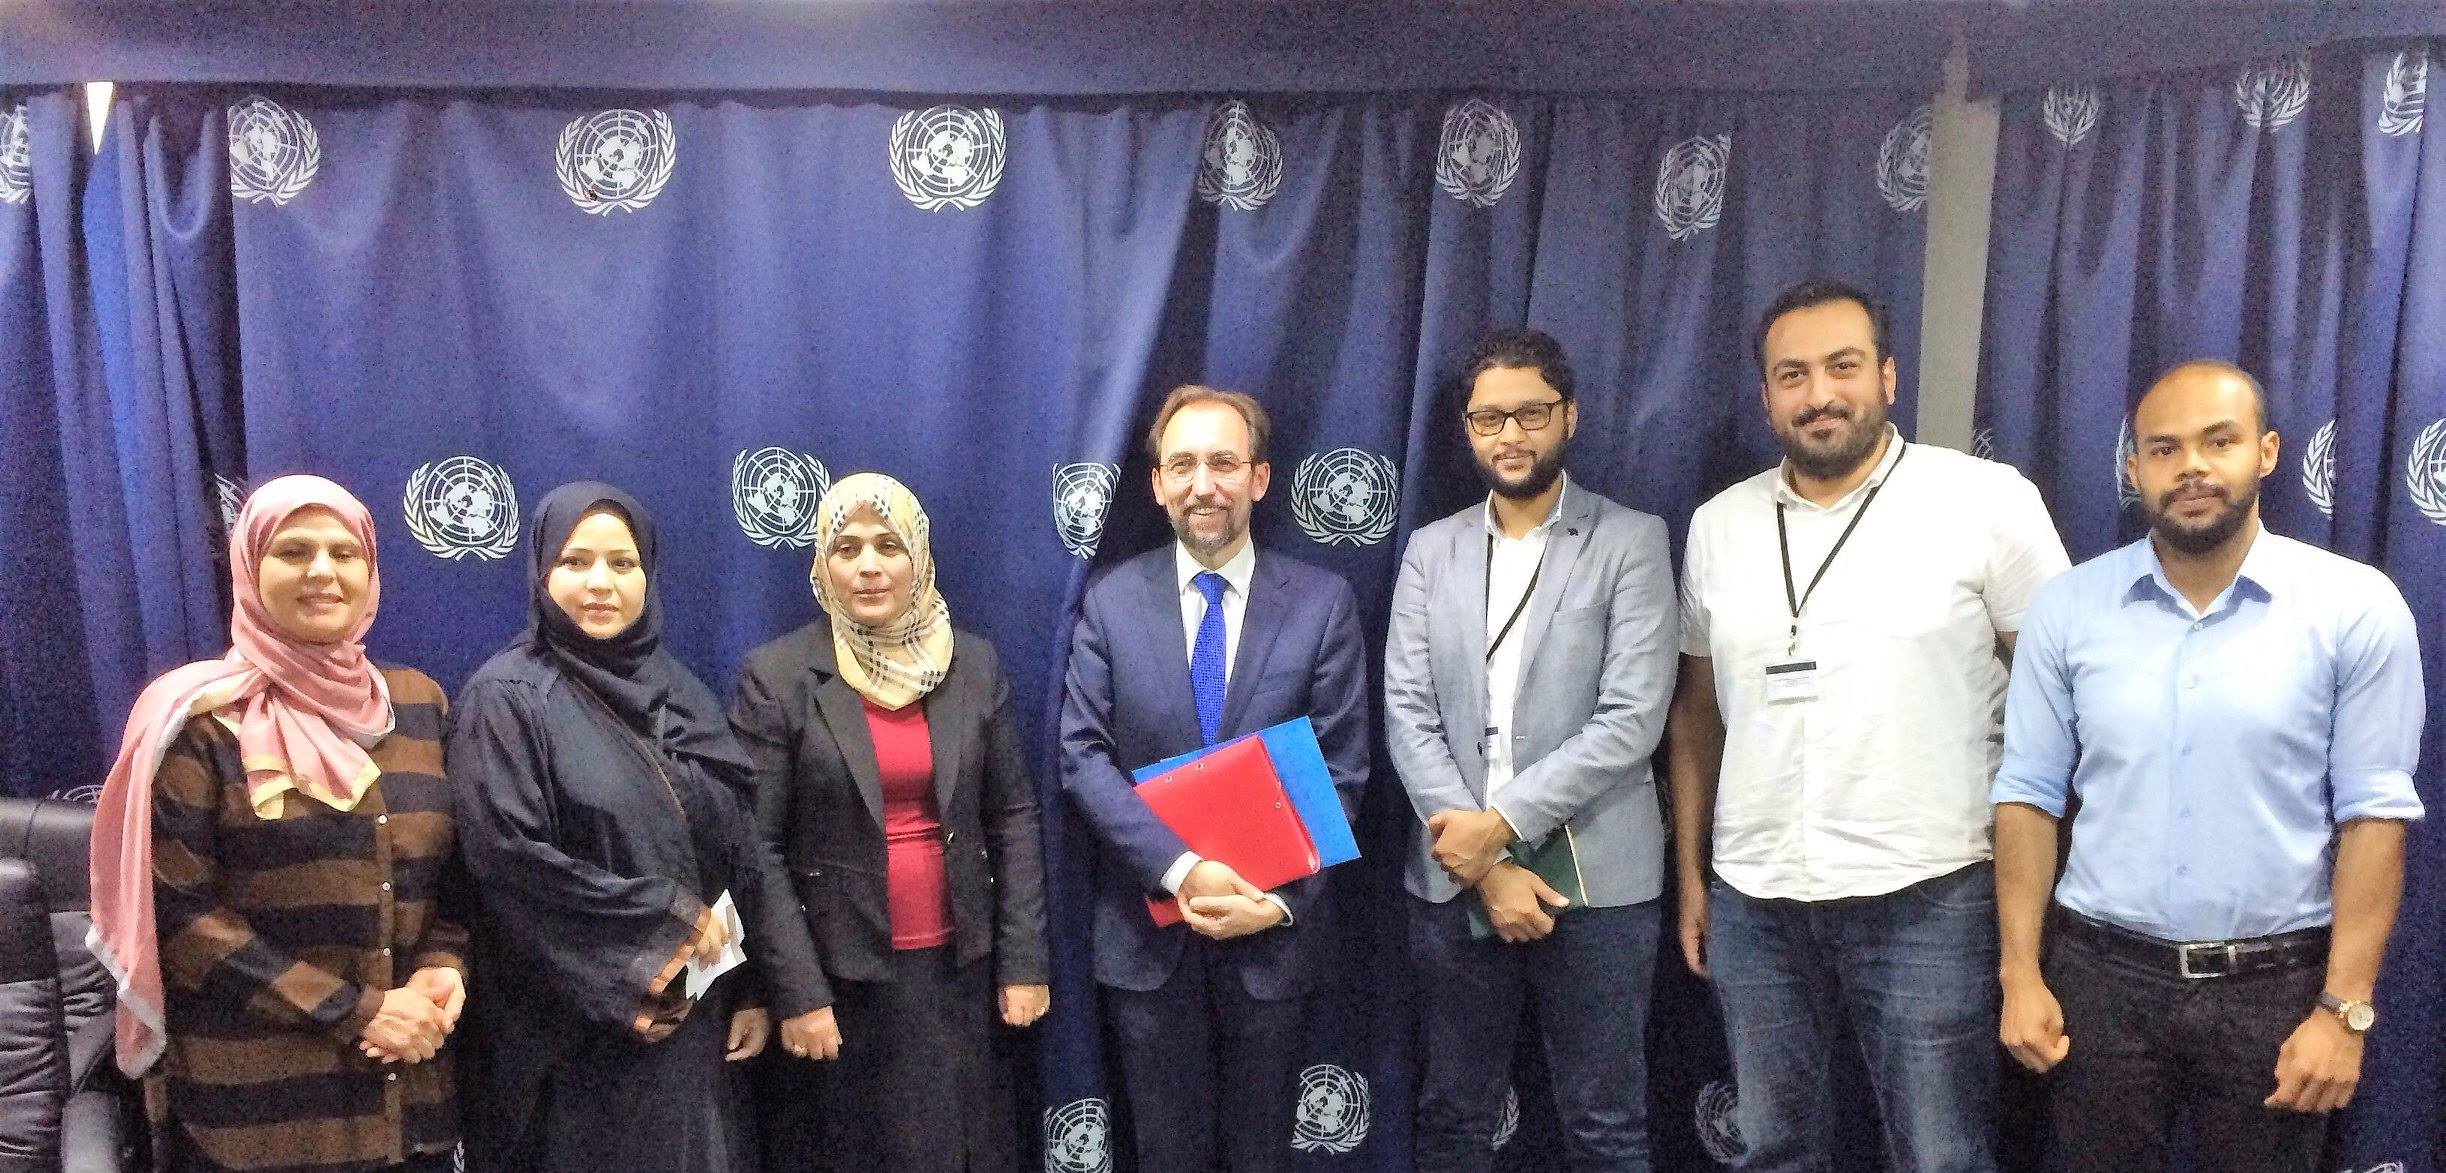  ‘The Platform’ in meetings with UN Libya Envoy and UN High Commissioner for Human Rights: Disregard for international mechanisms of accountability is the primary obstacle for peace.